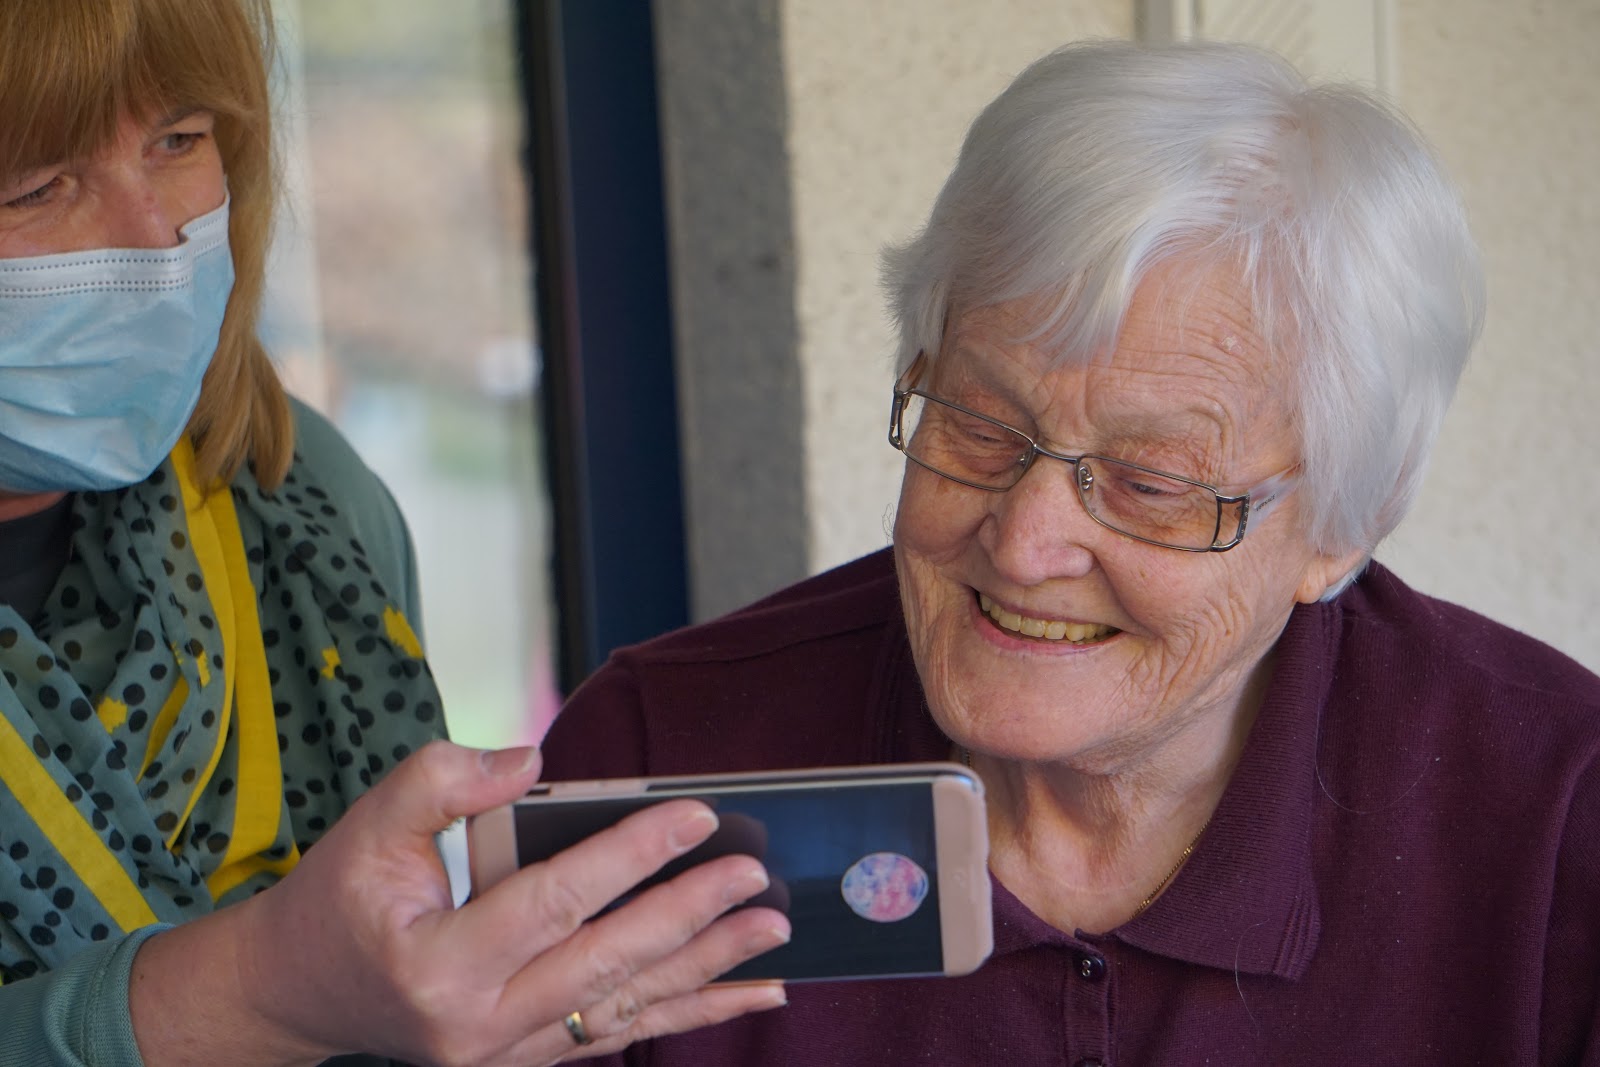 Older Adults in the Technology Age